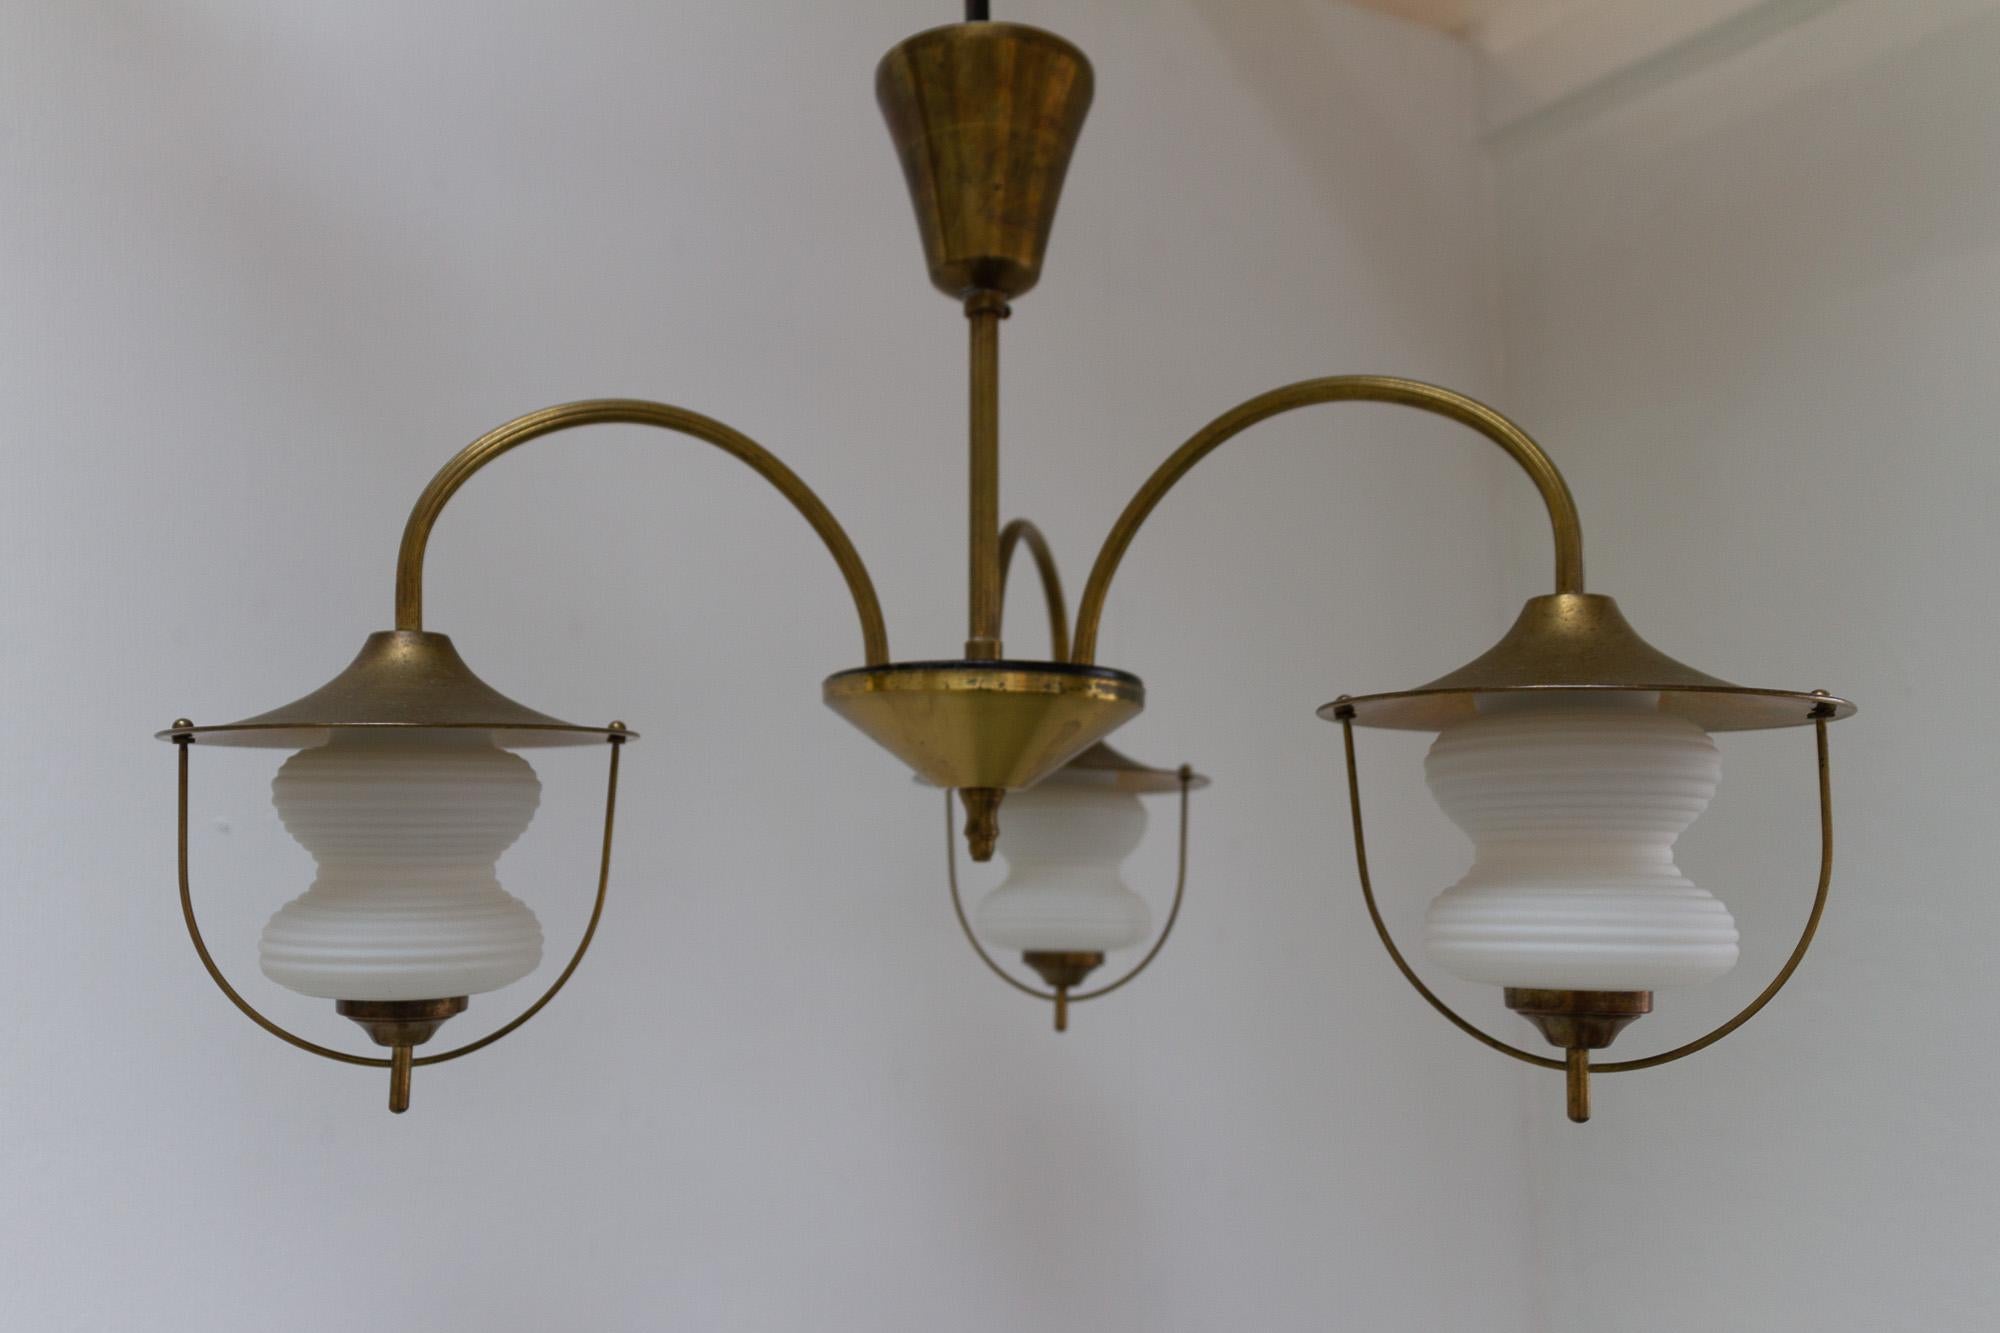 Vintage Danish Chandelier in Opal Glass and Brass, 1950s.
Mid-century modern Scandinavian ceiling lamp in beautifully patinated brass and three opaline glass shades suspended in arched arms. 
The three peanut/hourglass shaped white glass diffusers